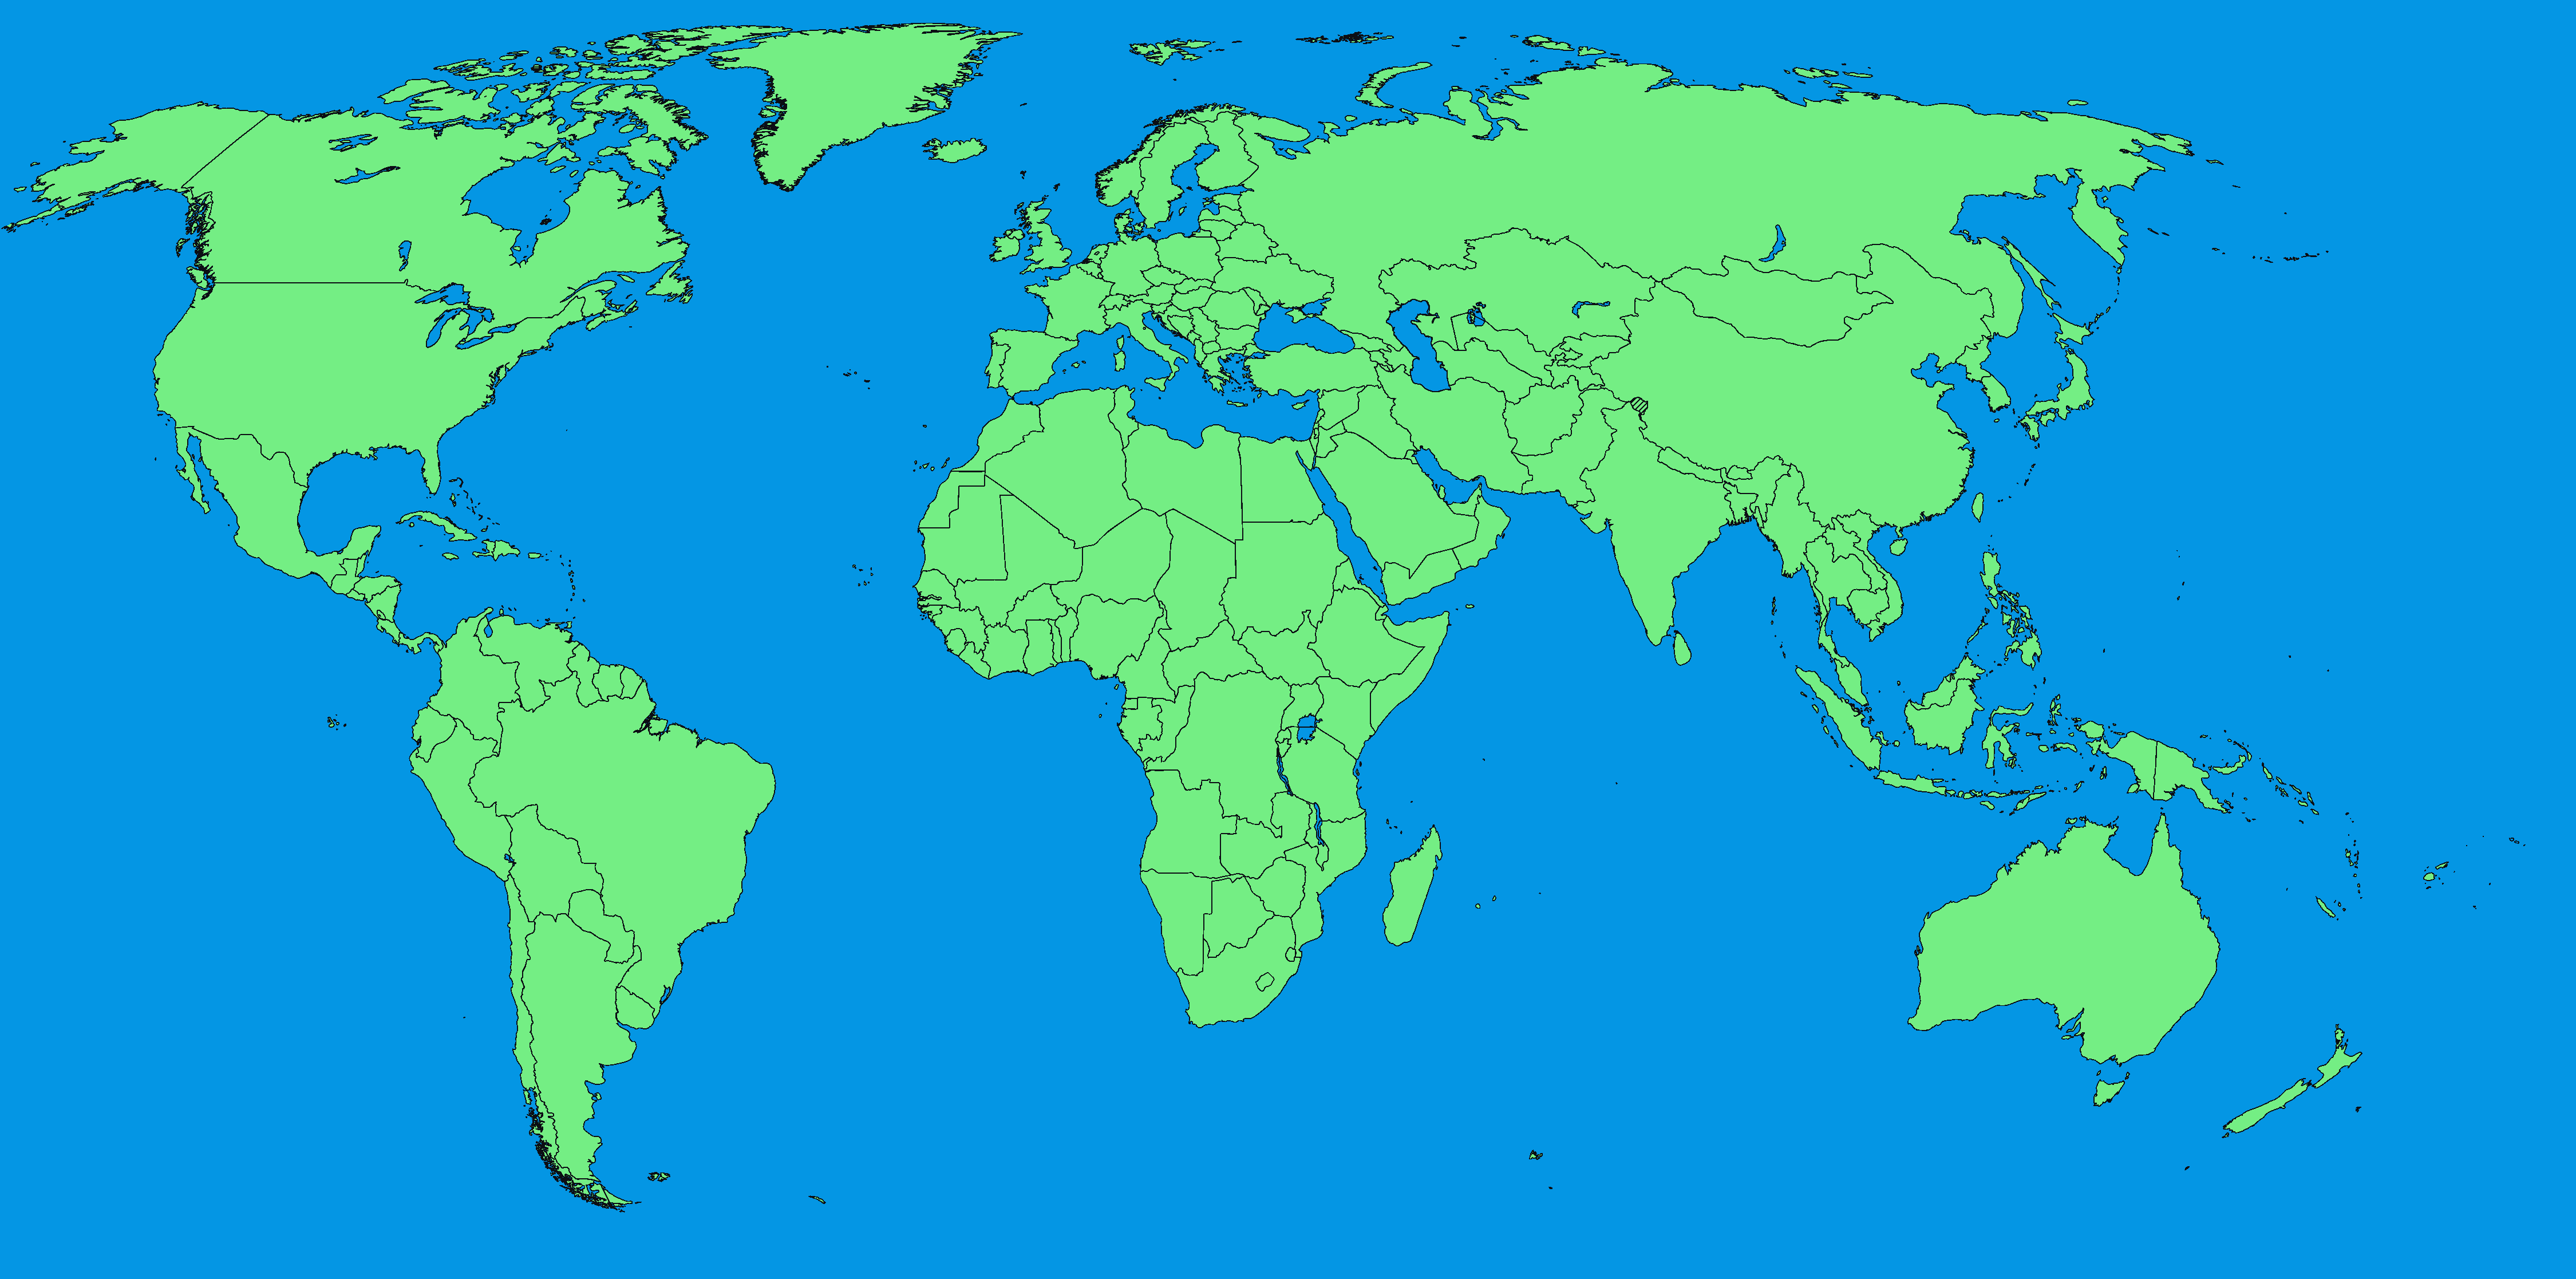 File A Large Blank World Map With Oceans Marked In Blue Edited Png